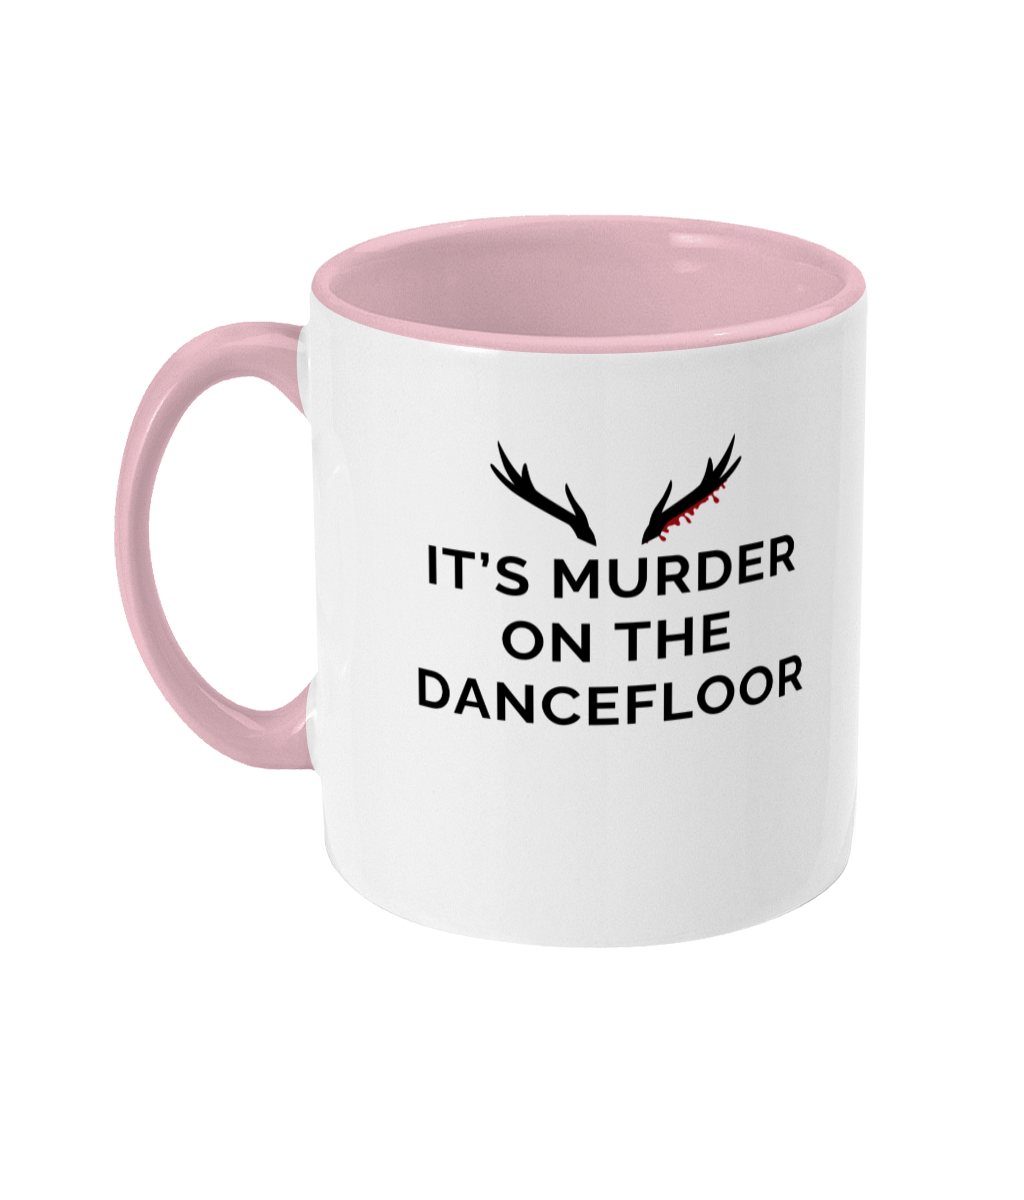 Mug with a pink handle and pink inner that reads "It's Murder On The Dancefloor" with antlers above the text with blood drips coming from the right bottom antler